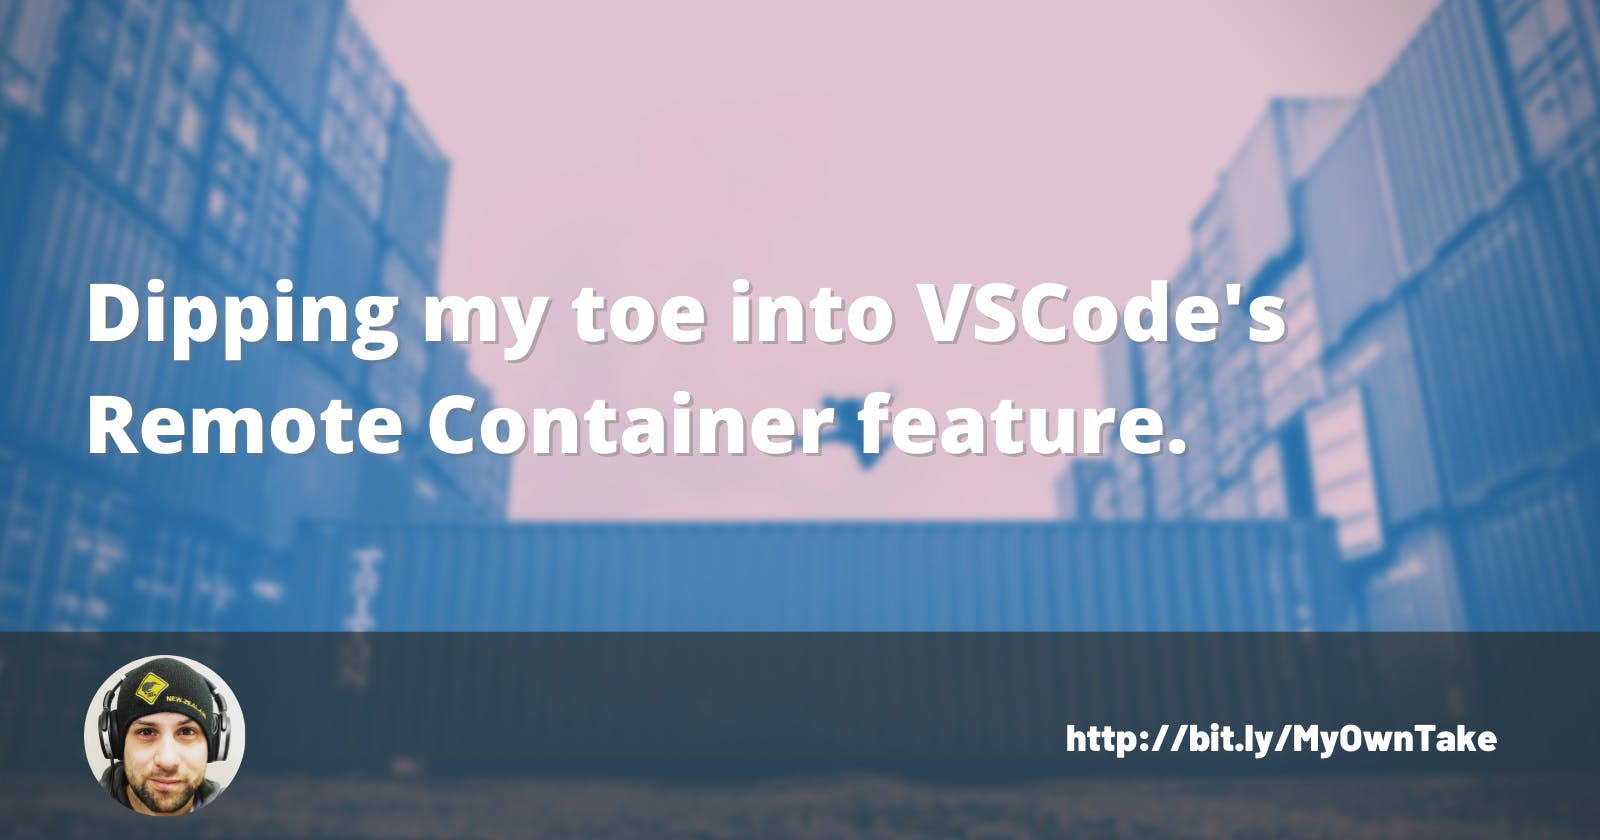 Dipping my toe into VSCode's Remote Container feature.